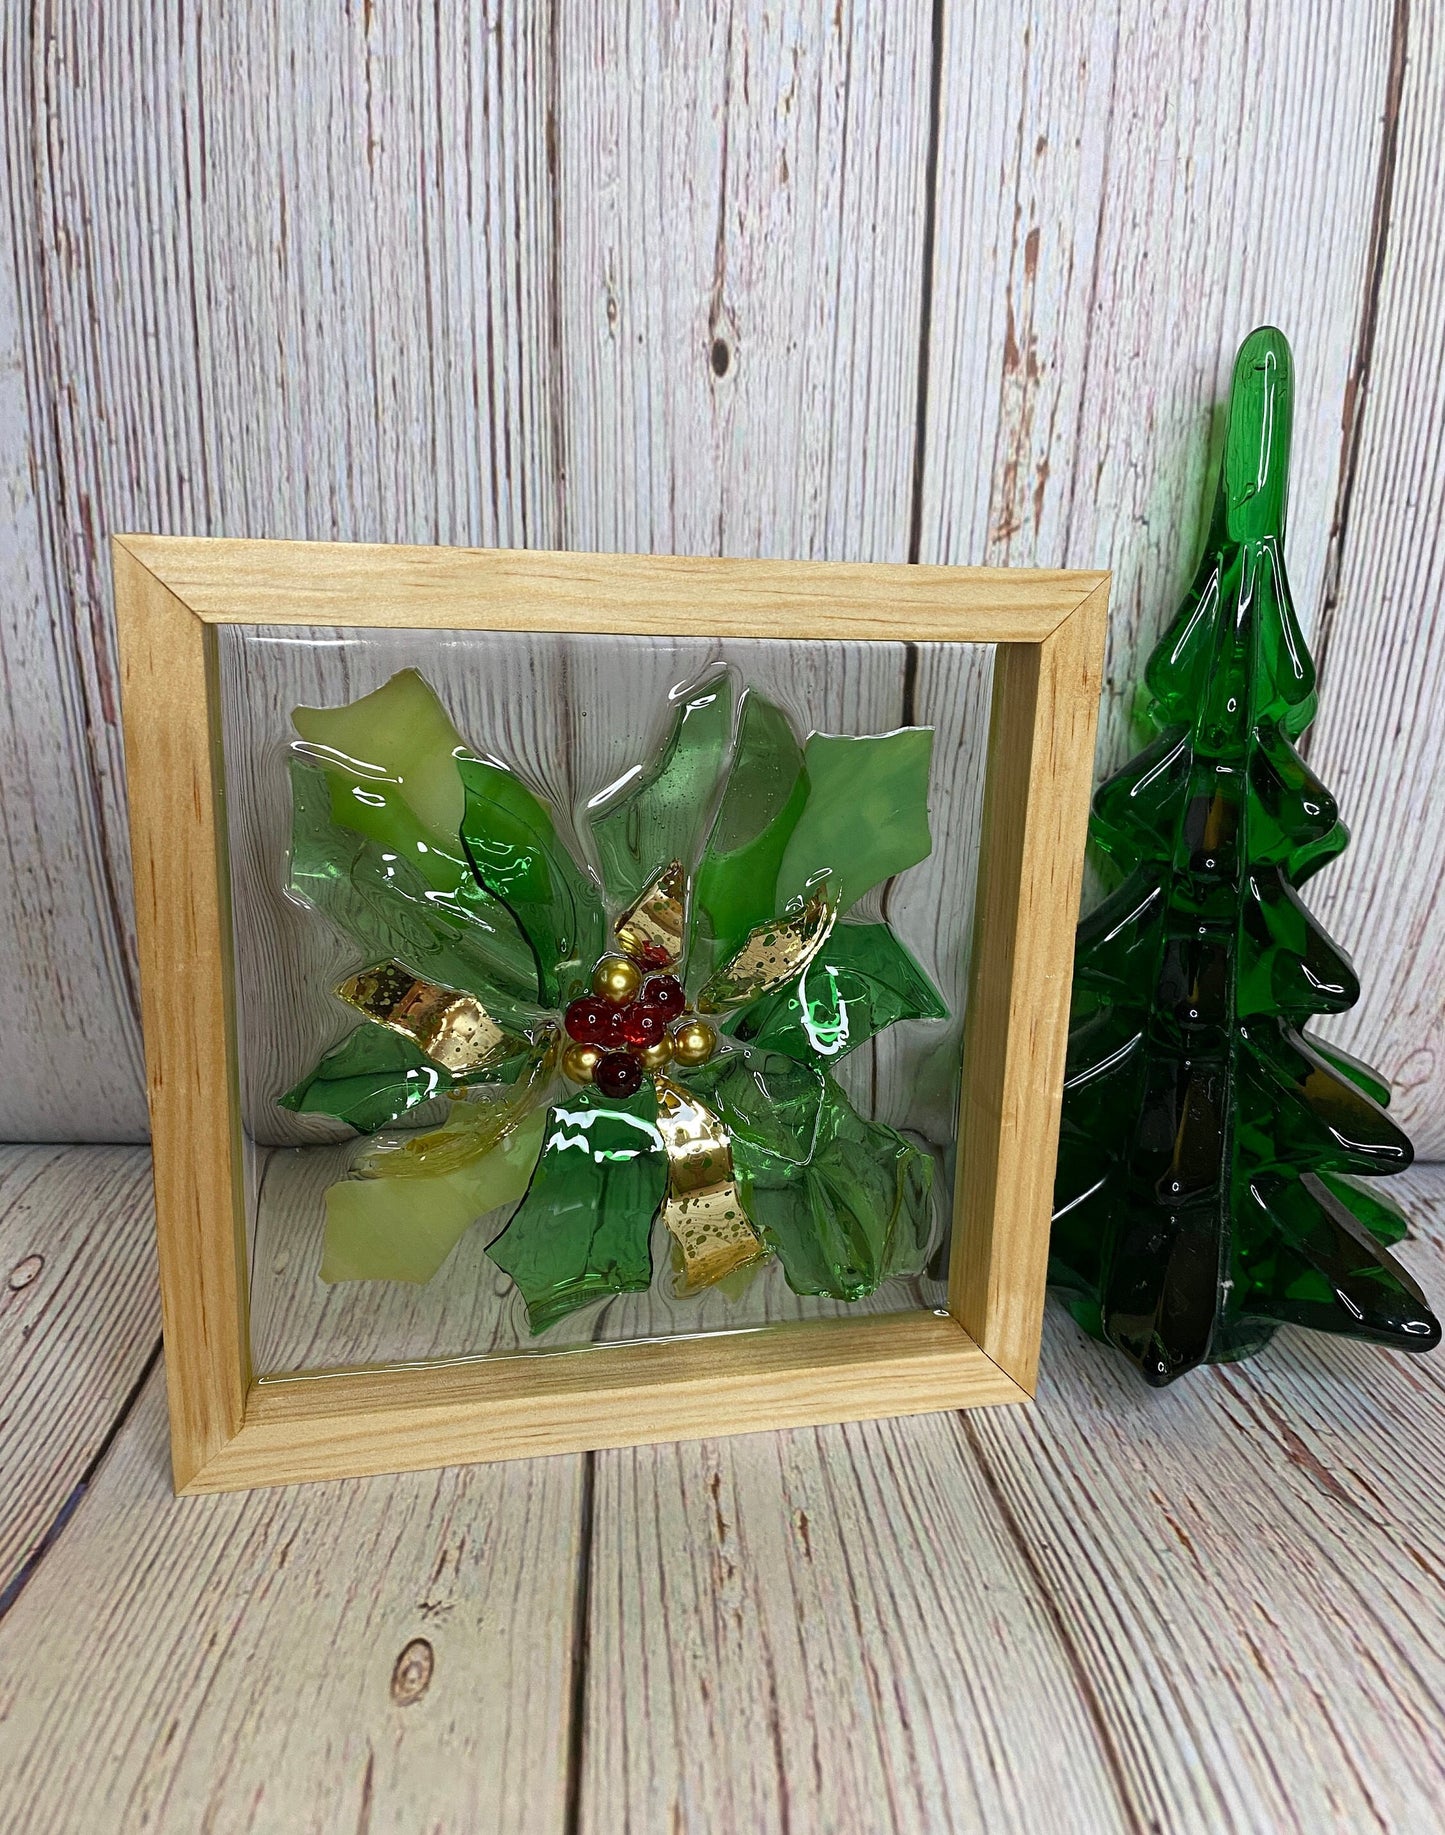 Holly Frame, Holly and Berries Decor, Recycled Glass and Resin Art, Christmas Mantel Decor, Kitchen Holly Decor, Shelf Sitter, Wreath Decor